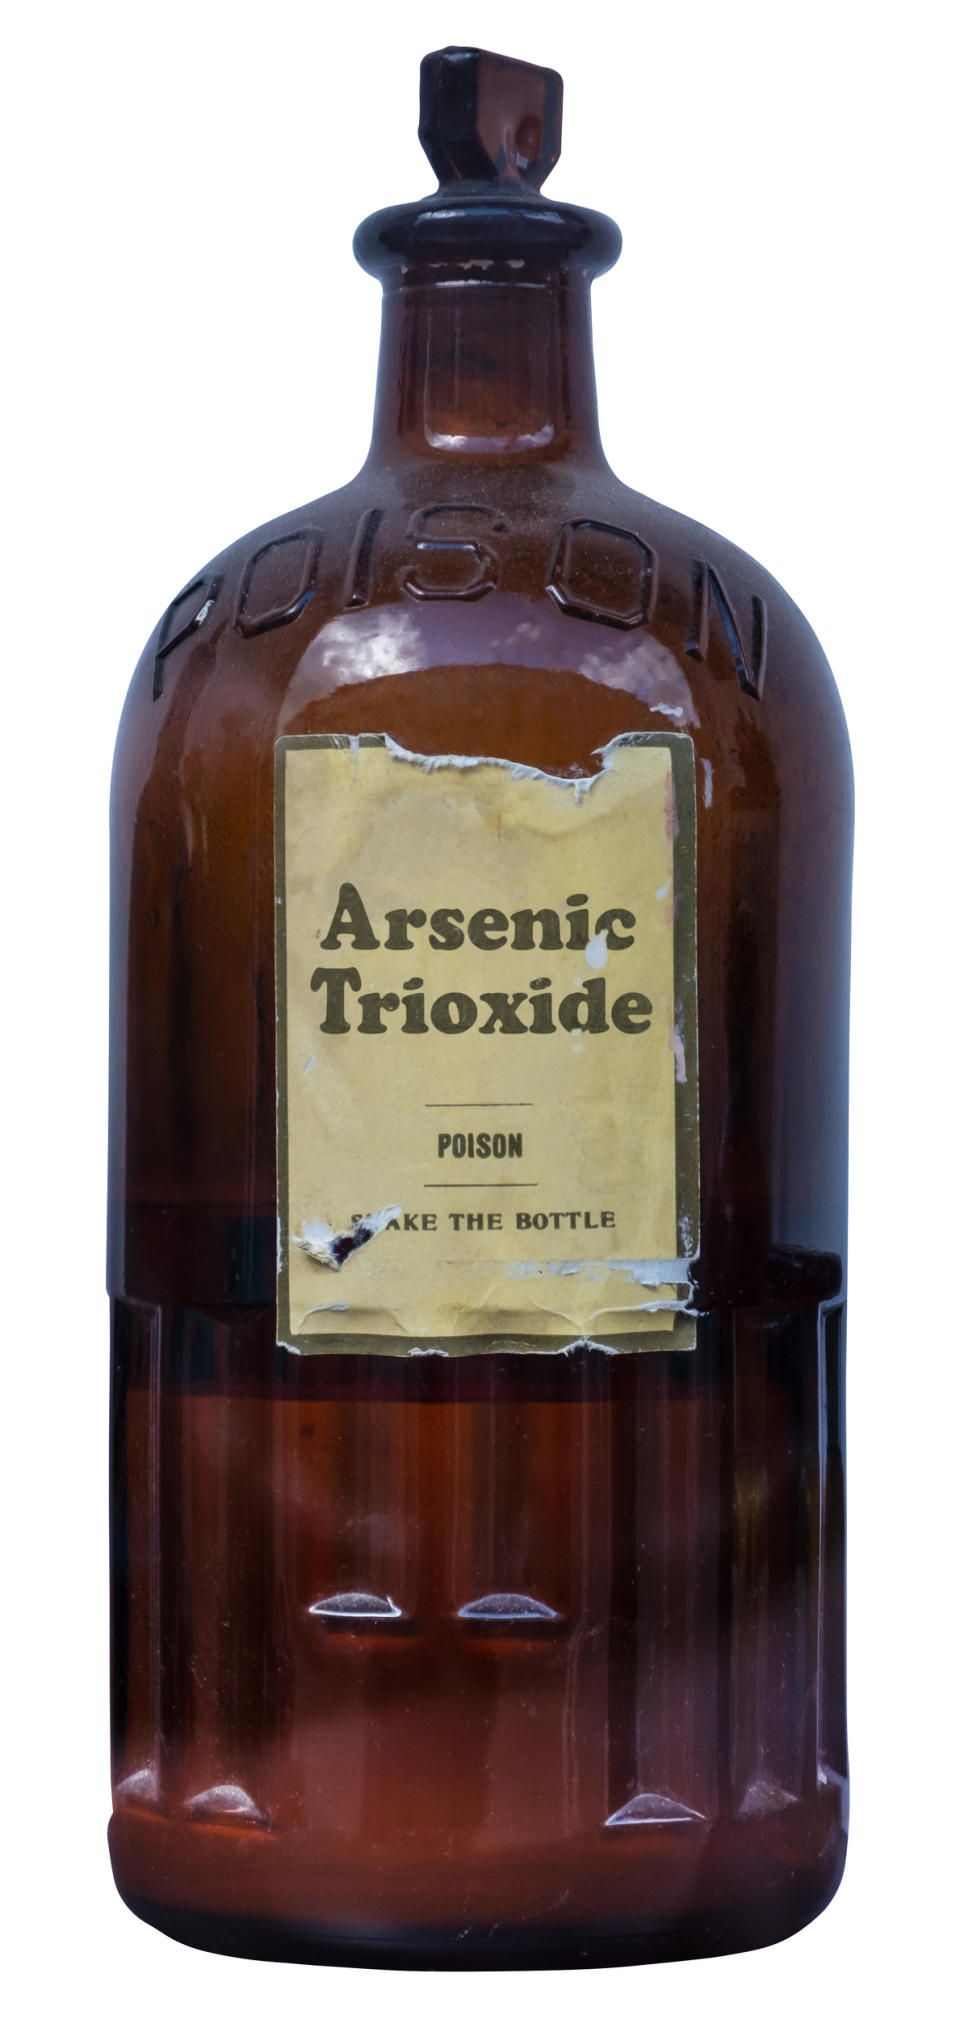 A brown bottle labeled "Arsenic Trioxide" with "Poison" below it and a note to "Shake the Bottle." The bottle is vintage and has a cork stopper